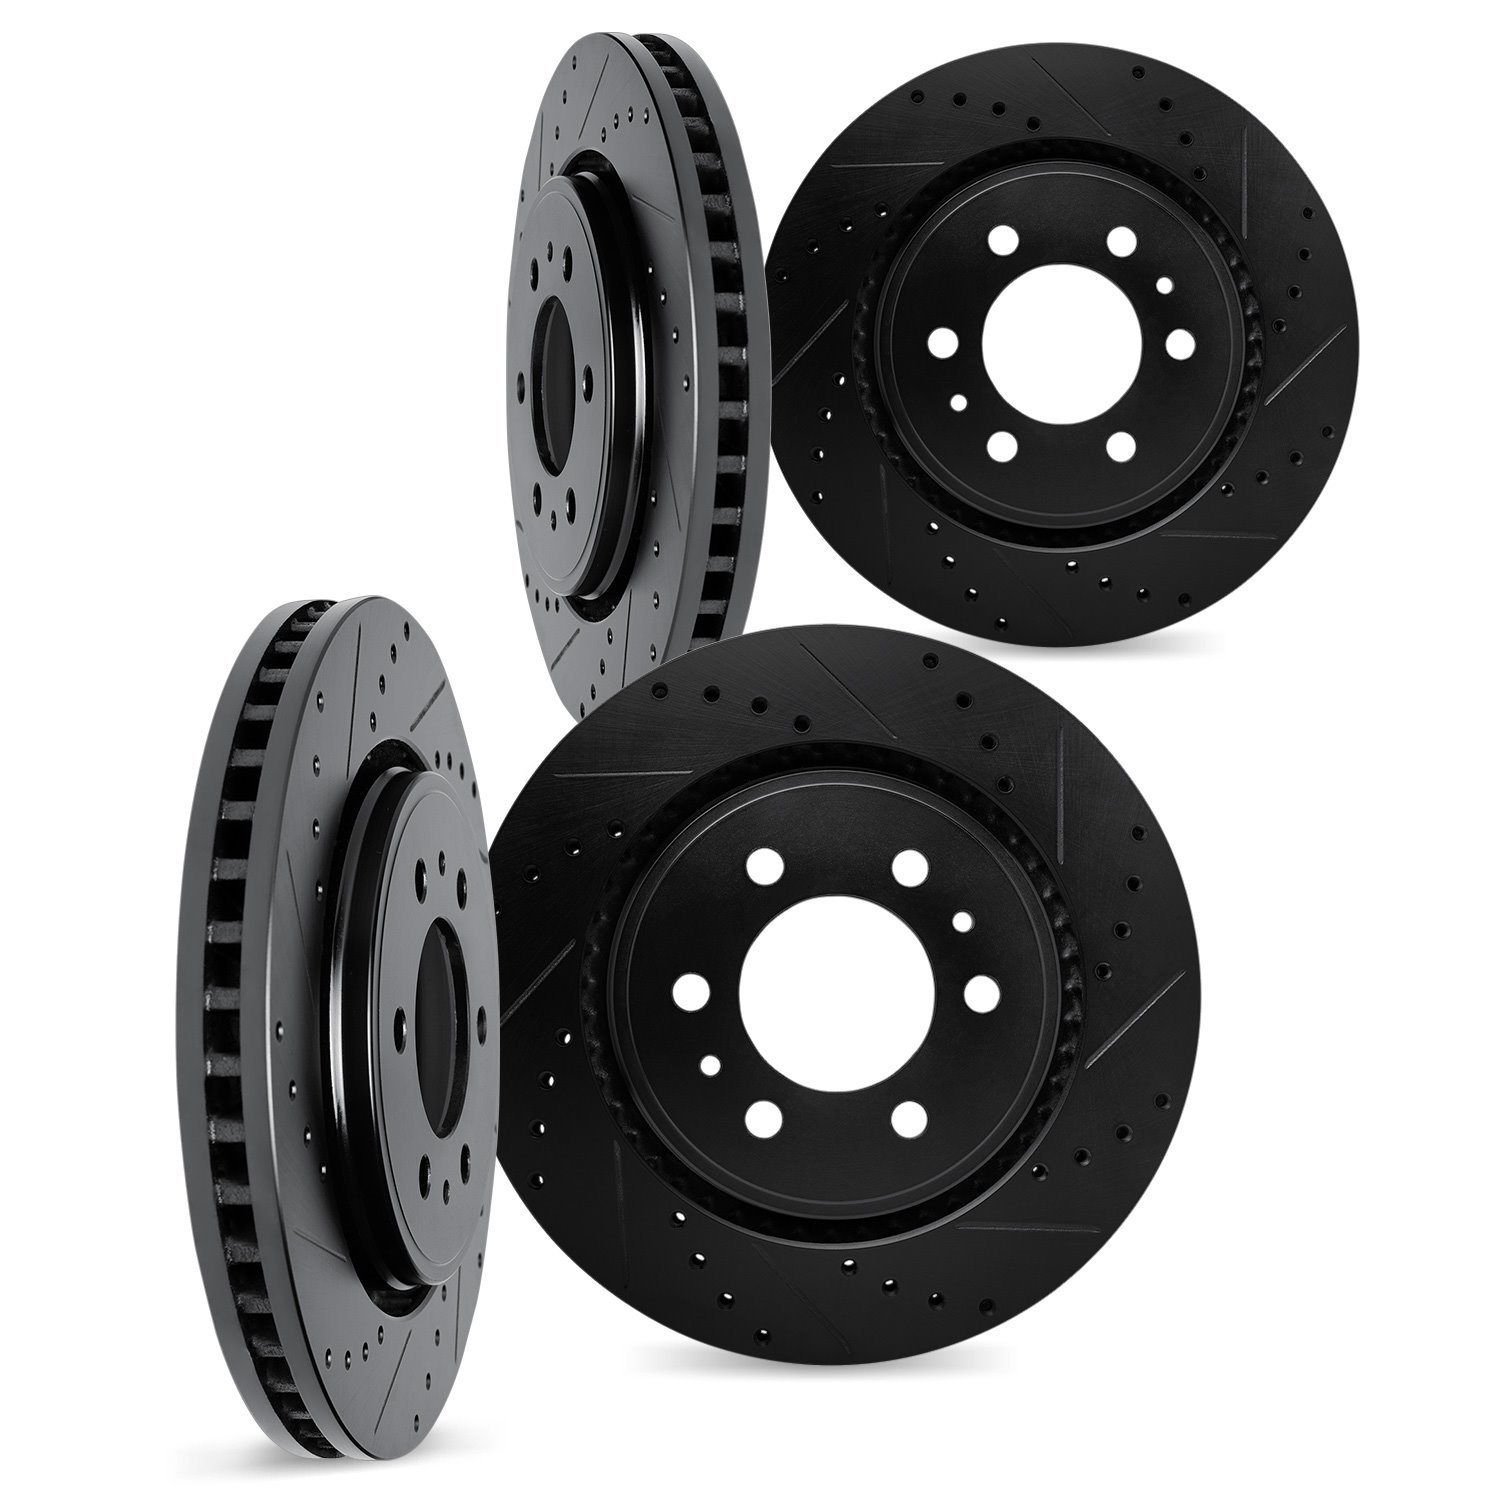 8004-46027 Drilled/Slotted Brake Rotors [Black], 2004-2009 GM, Position: Front and Rear